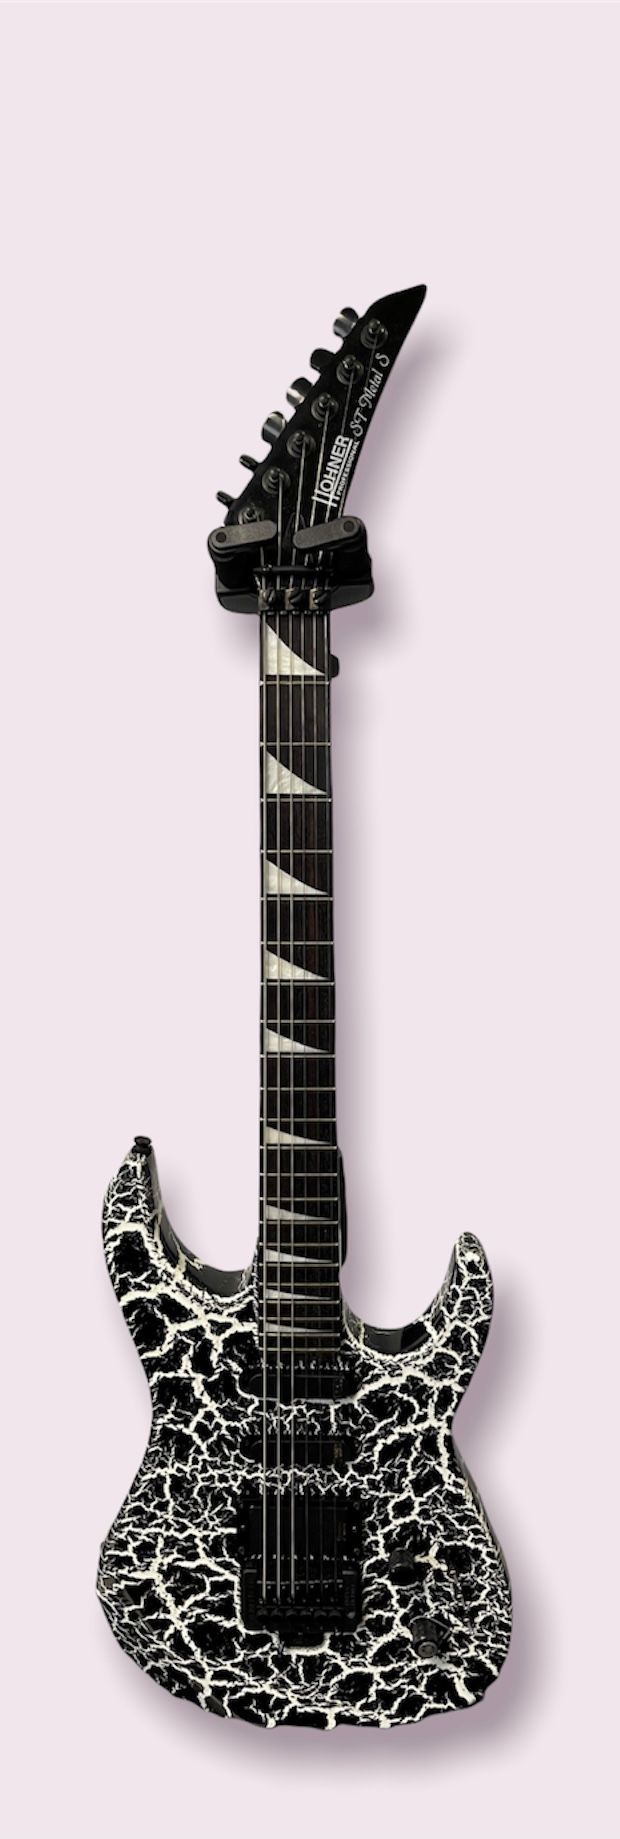 Null ELECTRIC GUITAR, HOHMER ST METAL 5

Black and white animal print, # 8929949&hellip;